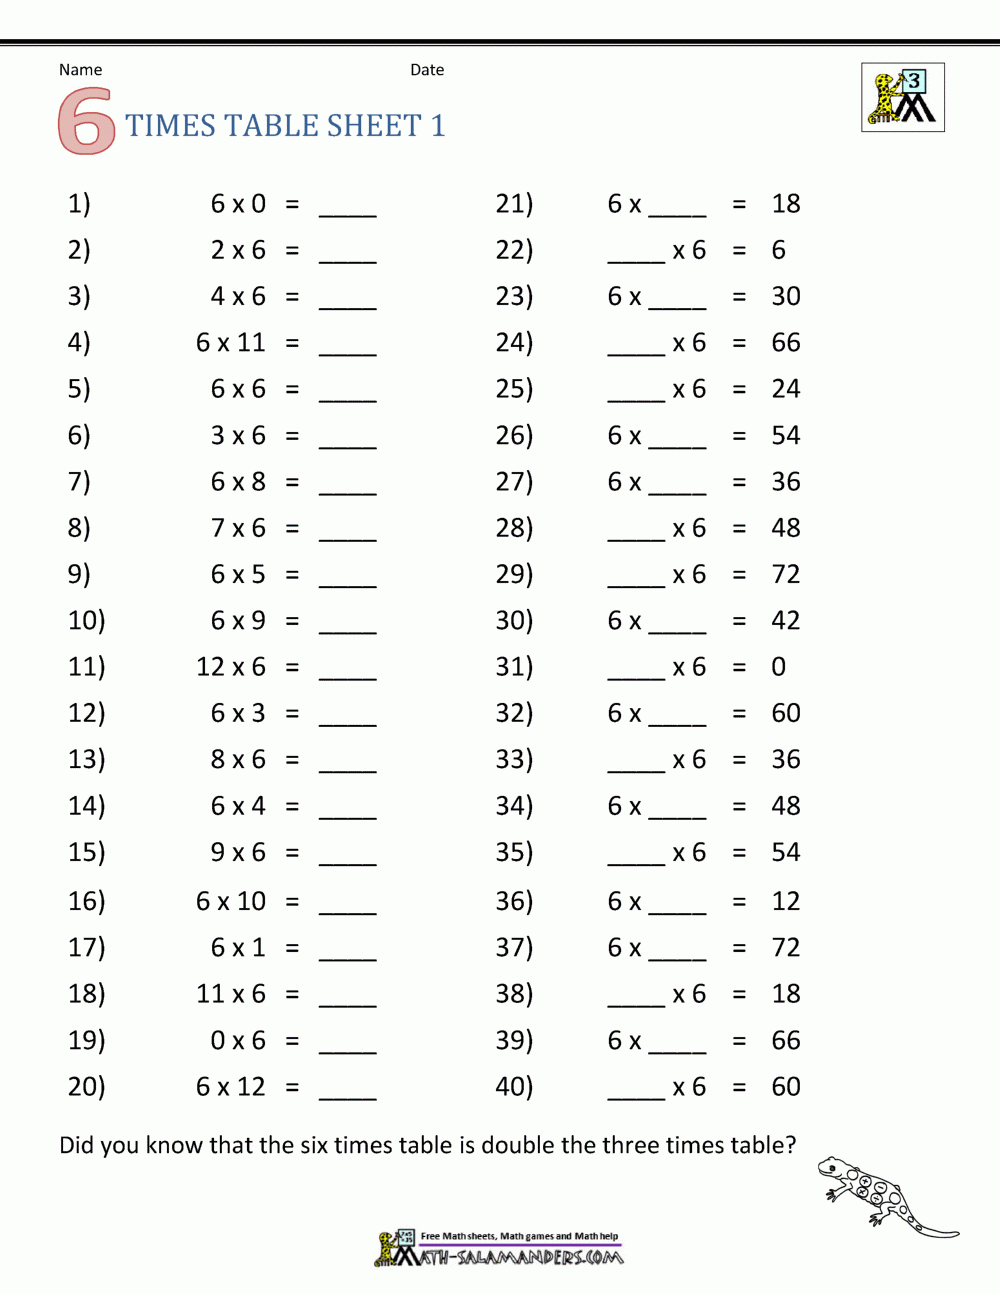 Multiplication Drill Sheets 3Rd Grade throughout Free Printable Multiplication Drills